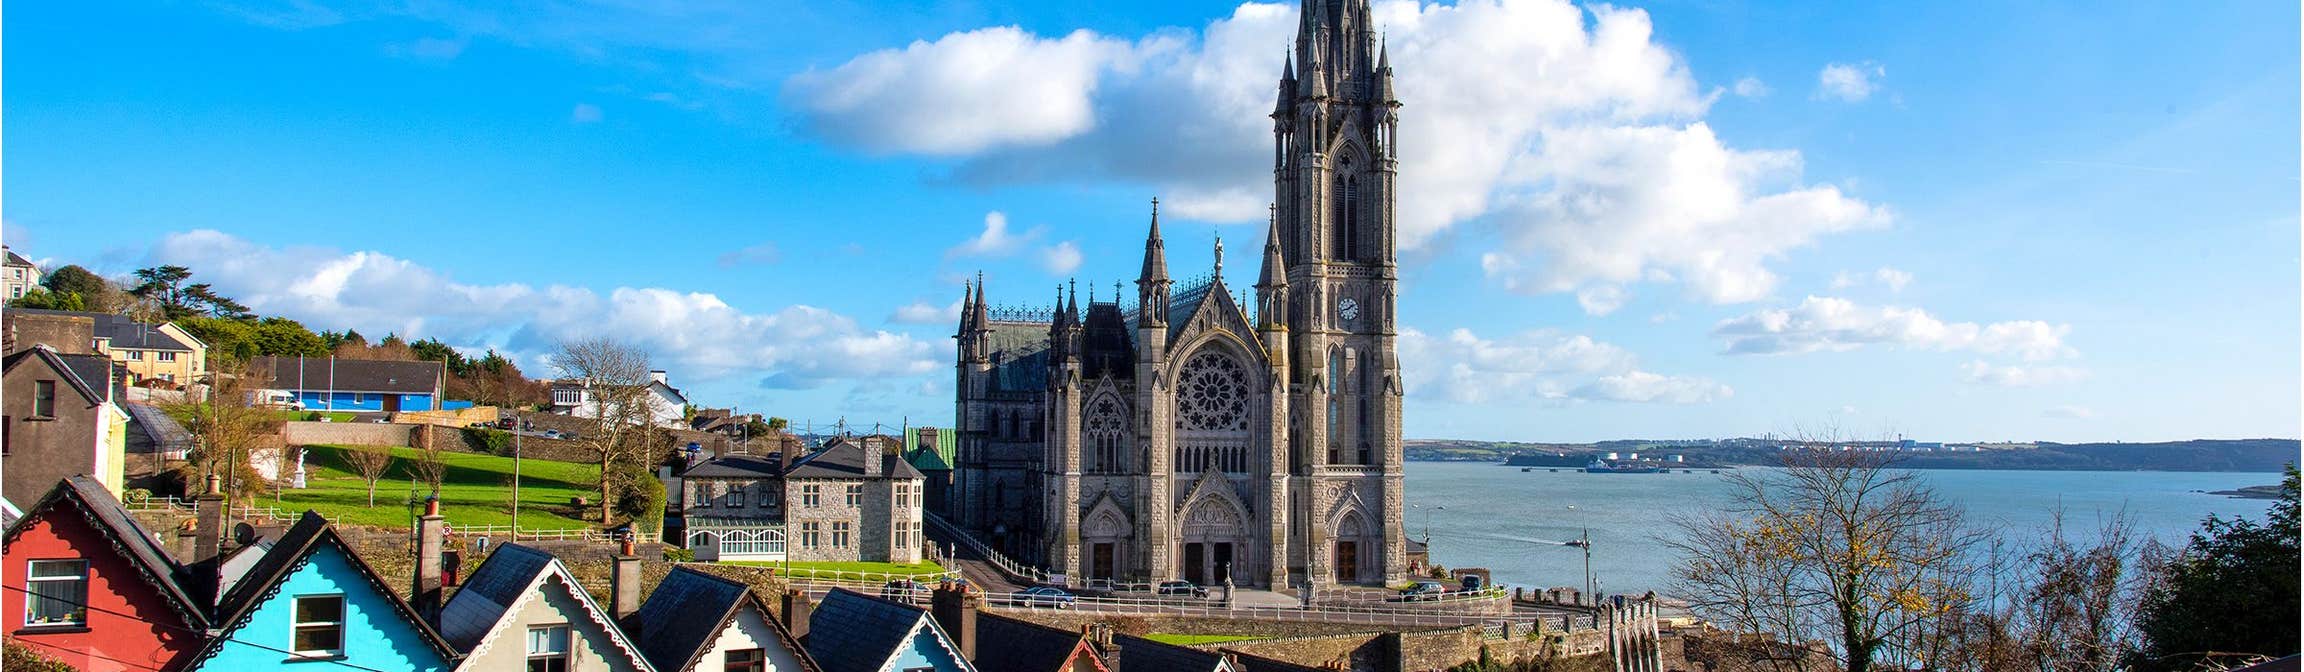 Colourful buildings in front of a cathedral in Cobh, Cork